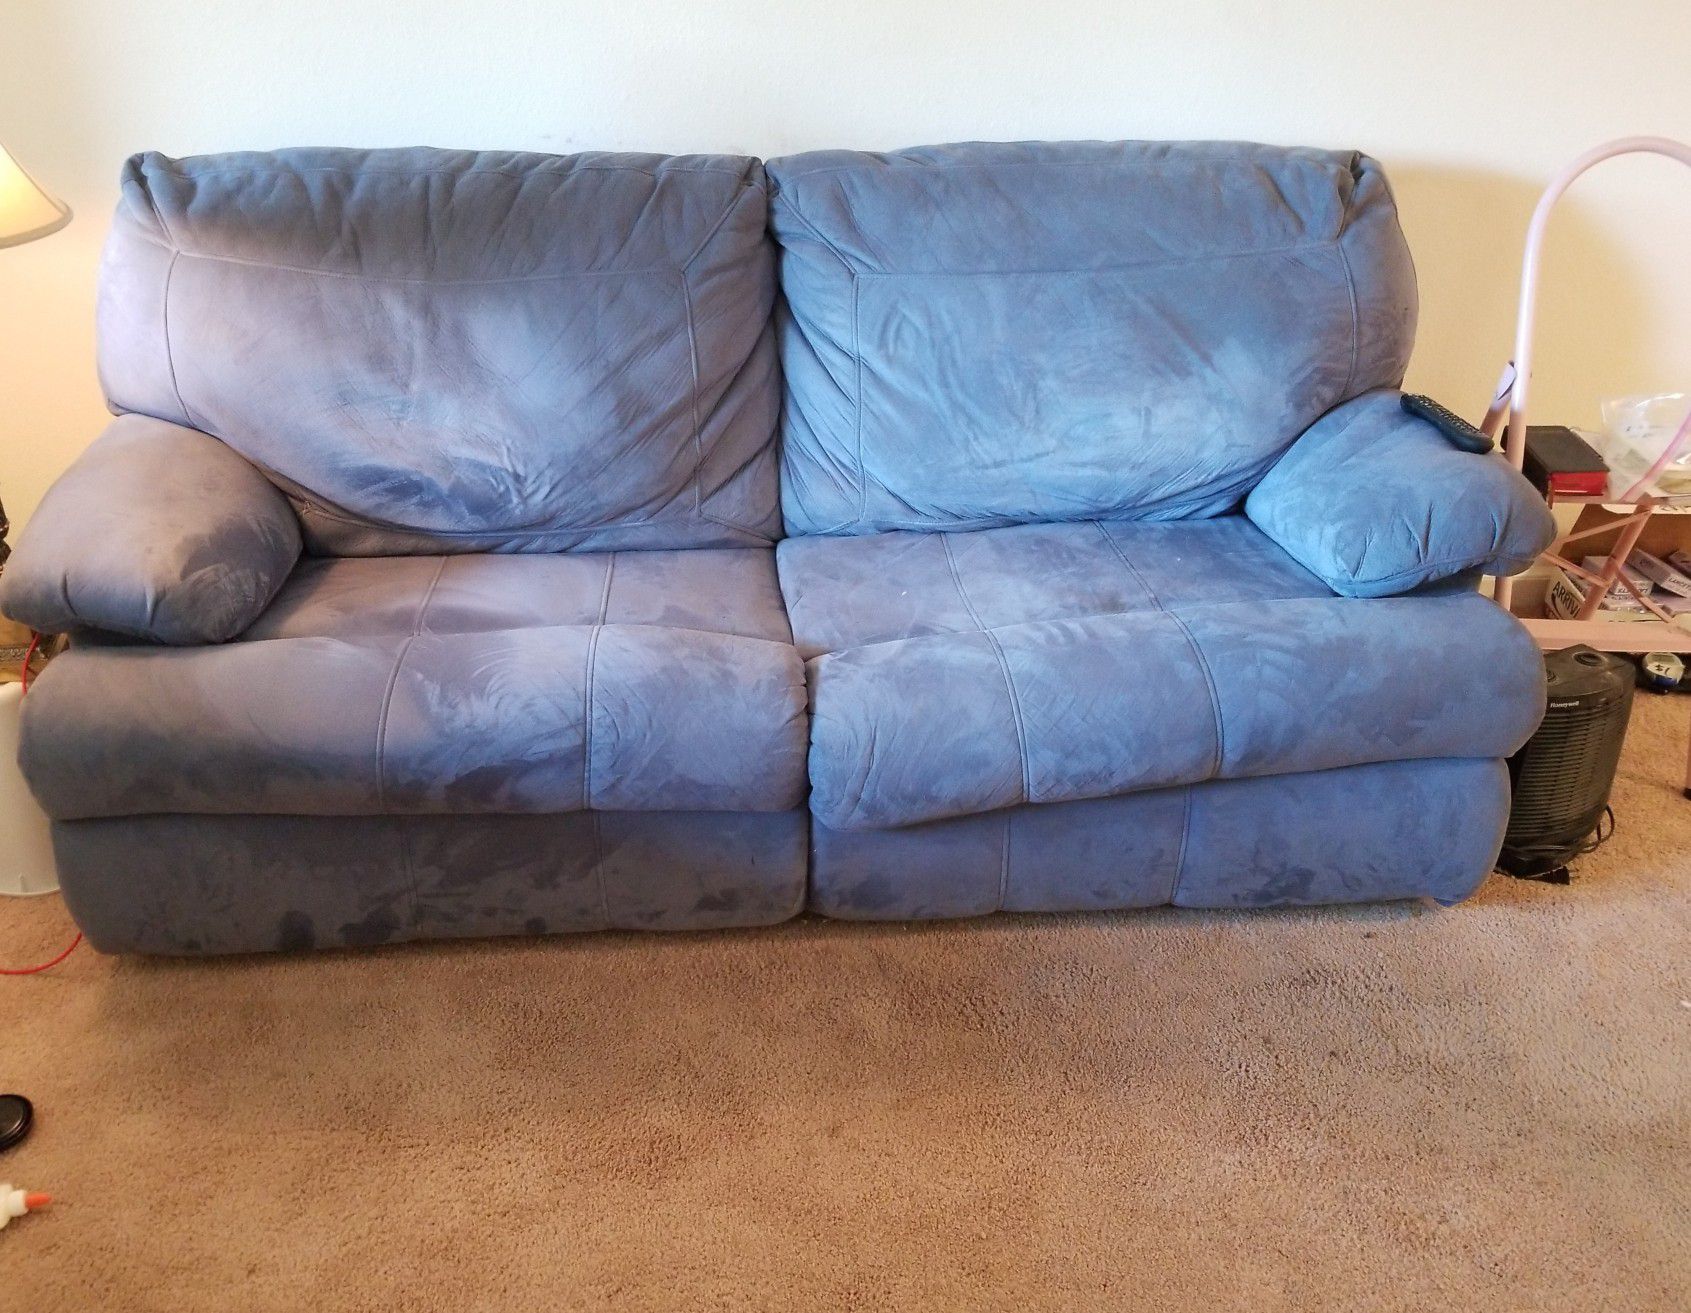 FREE sofa with hide-a-bed